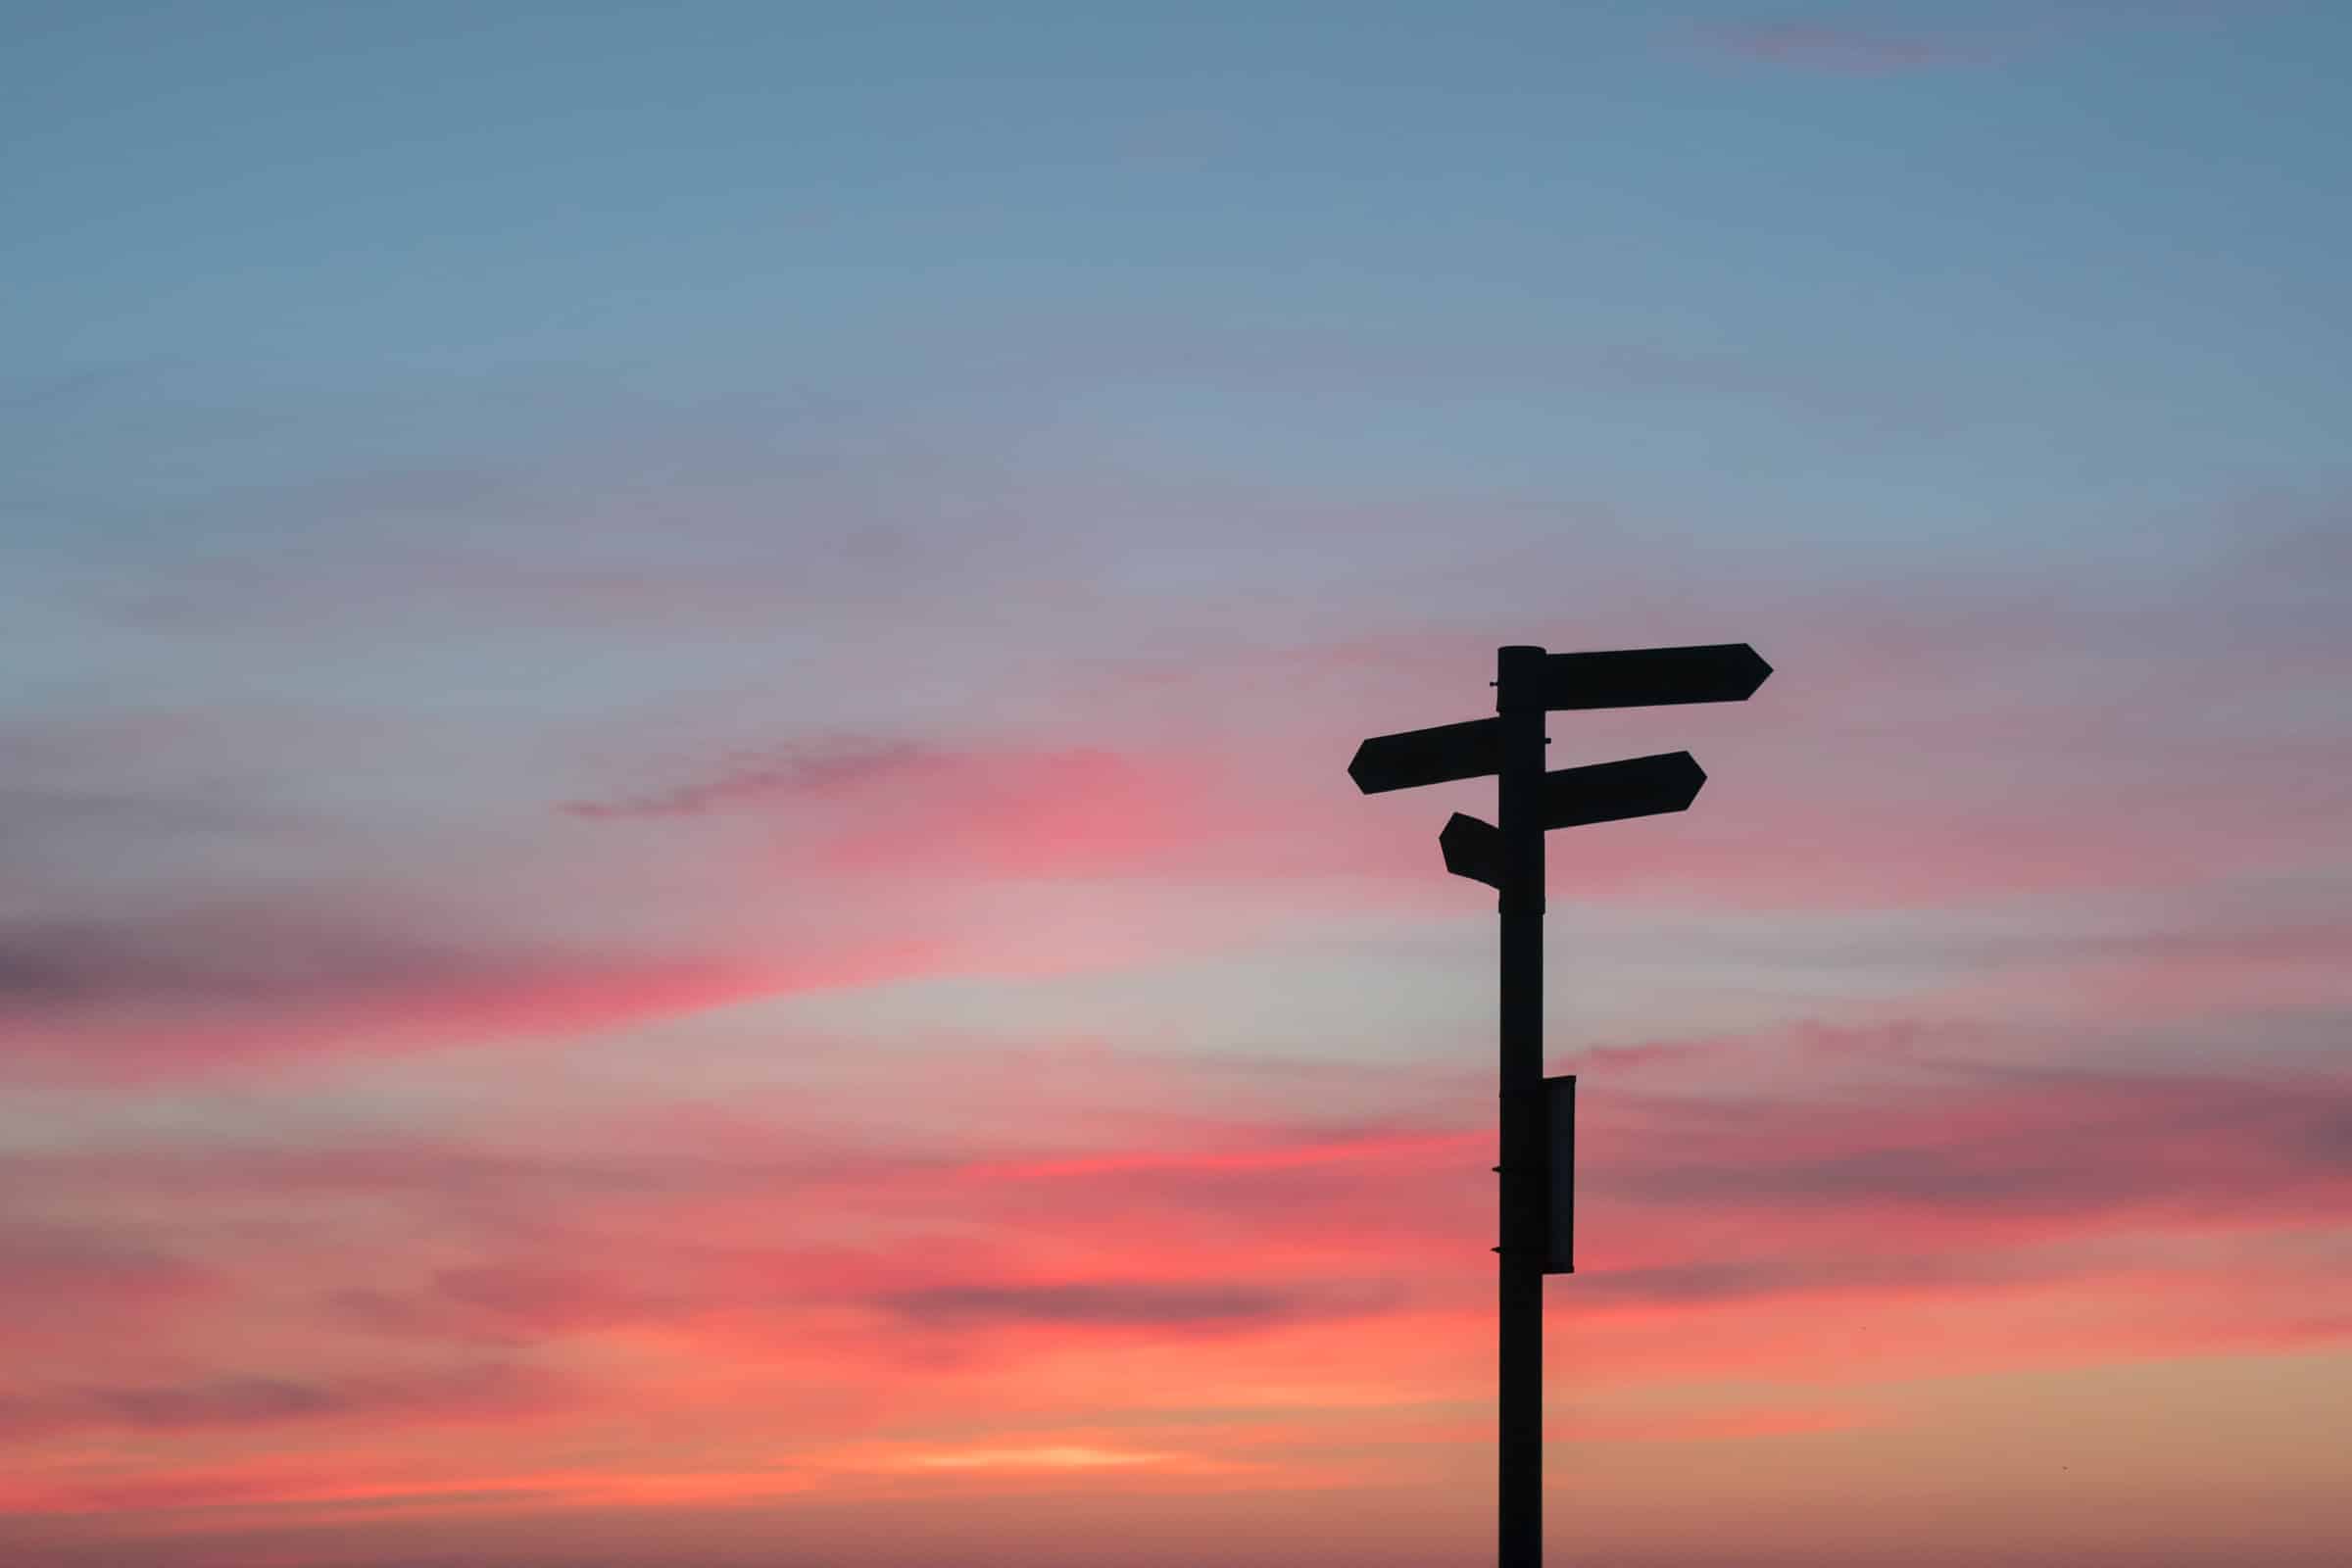 signpost in silhouette against sunset for pipeline tracking article